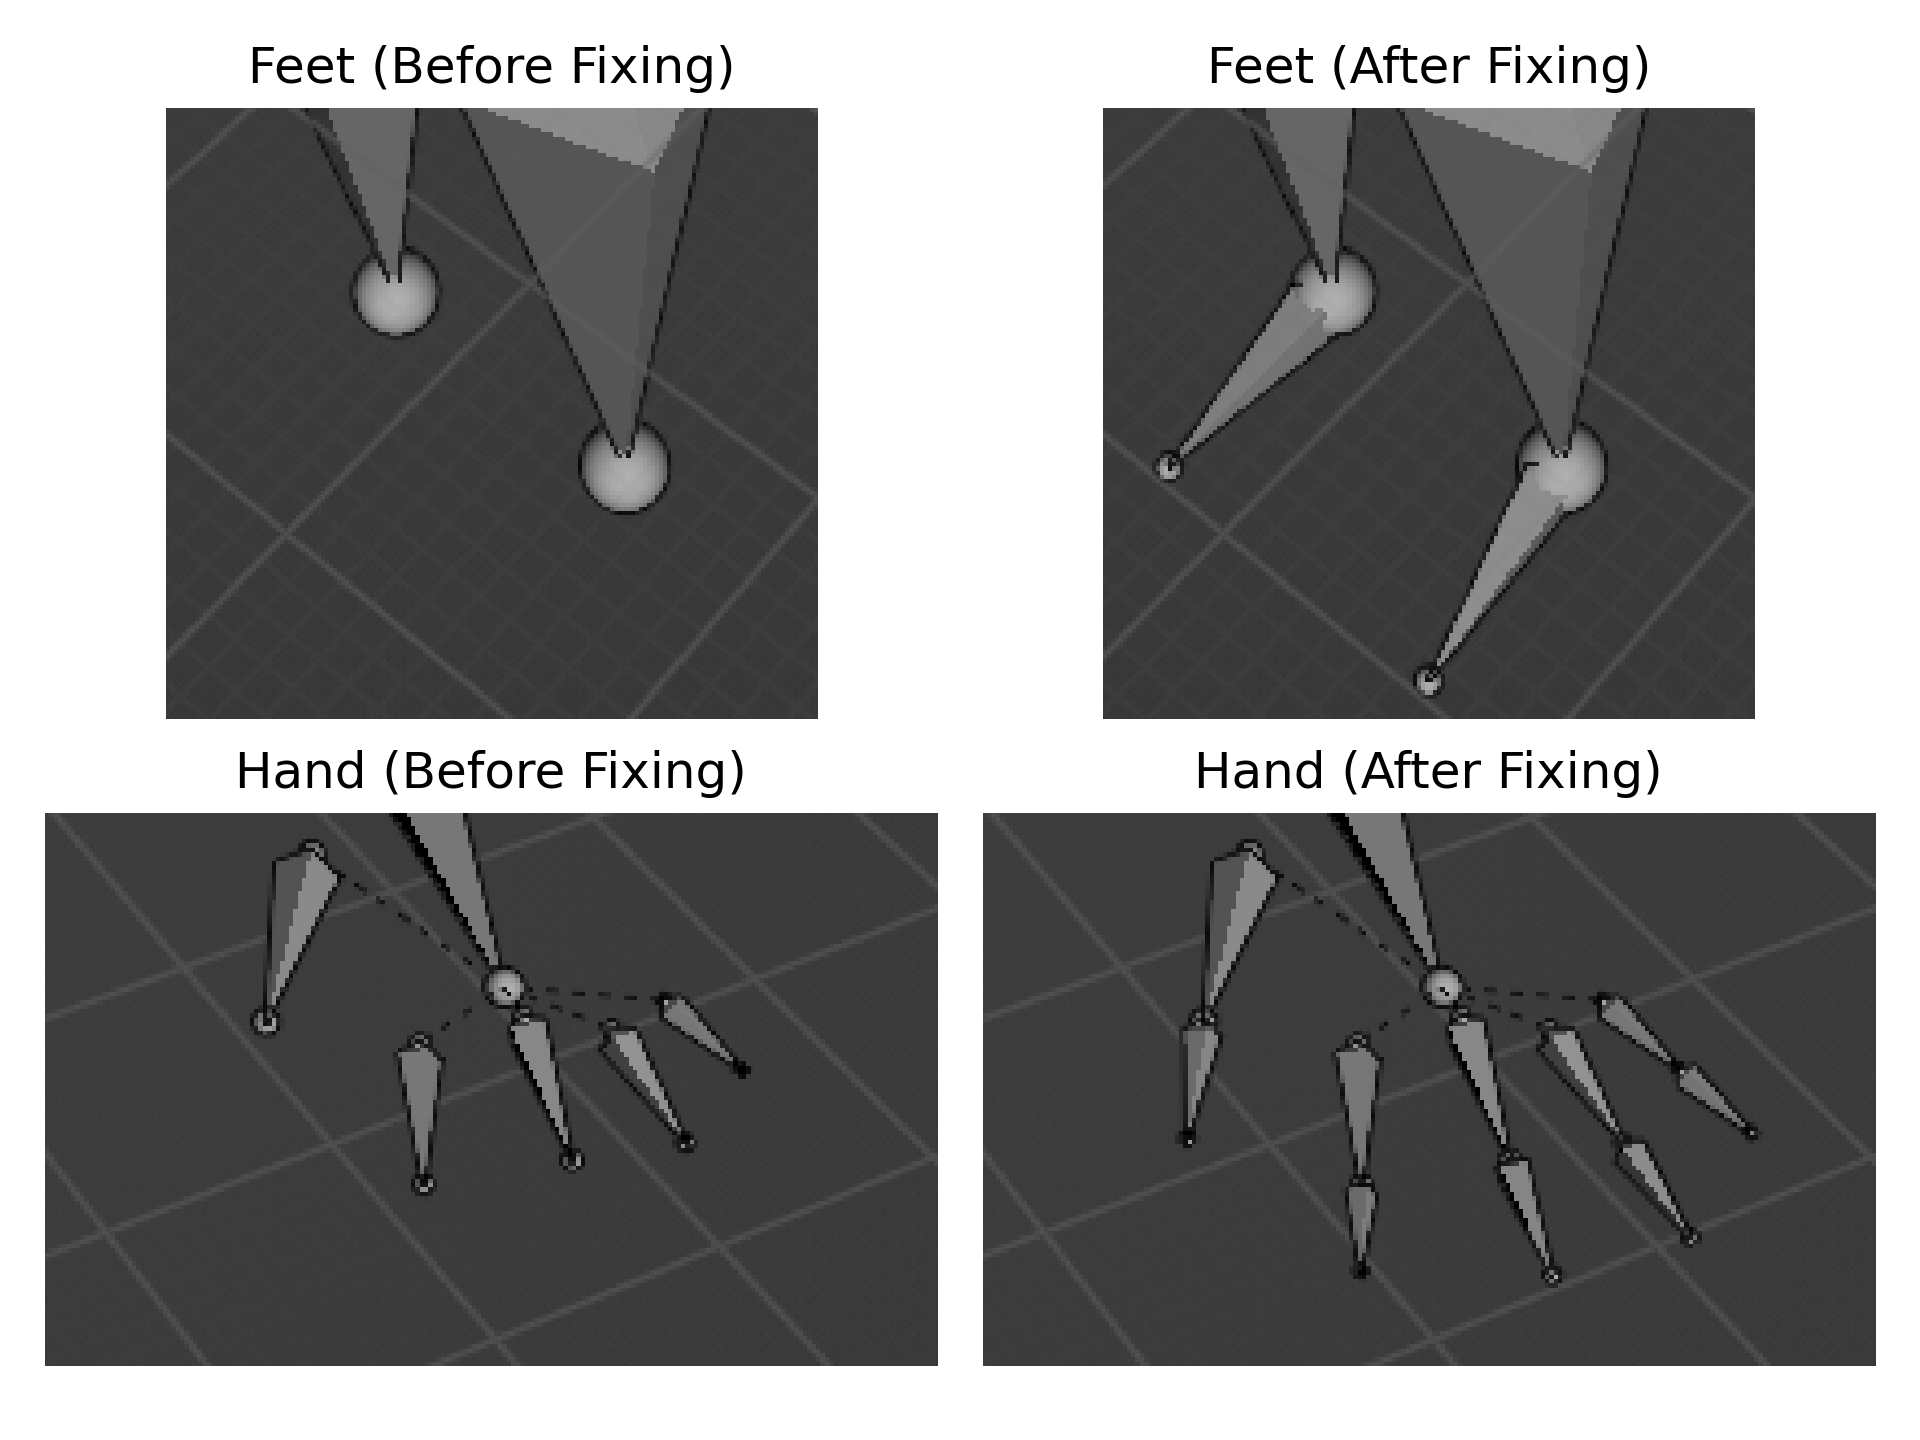 Hand and feet of the character before and after fixing the offset problem.